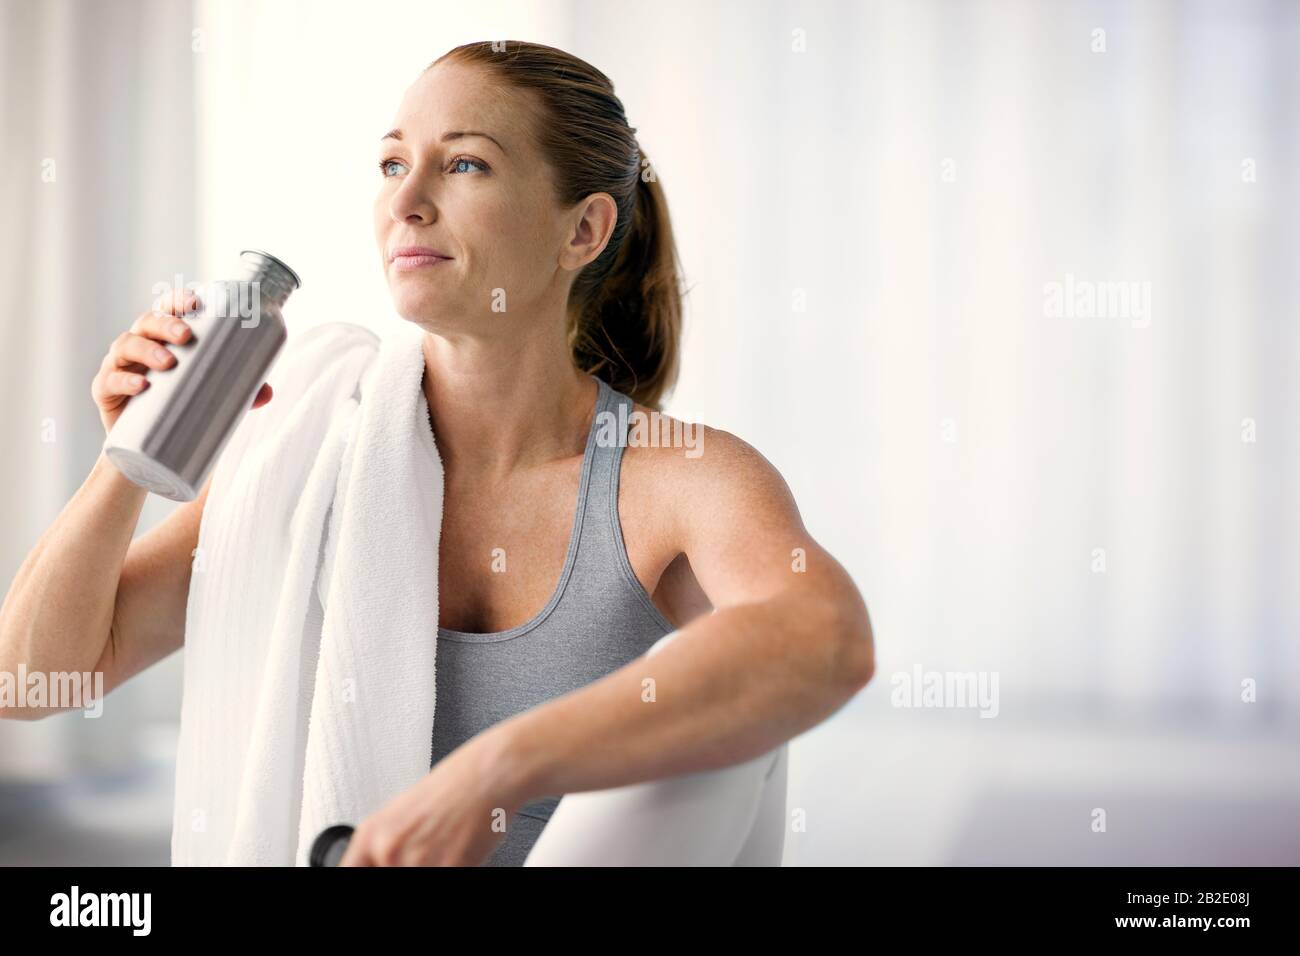 Mid adult woman drinking from a water bottle after exercising Stock Photo